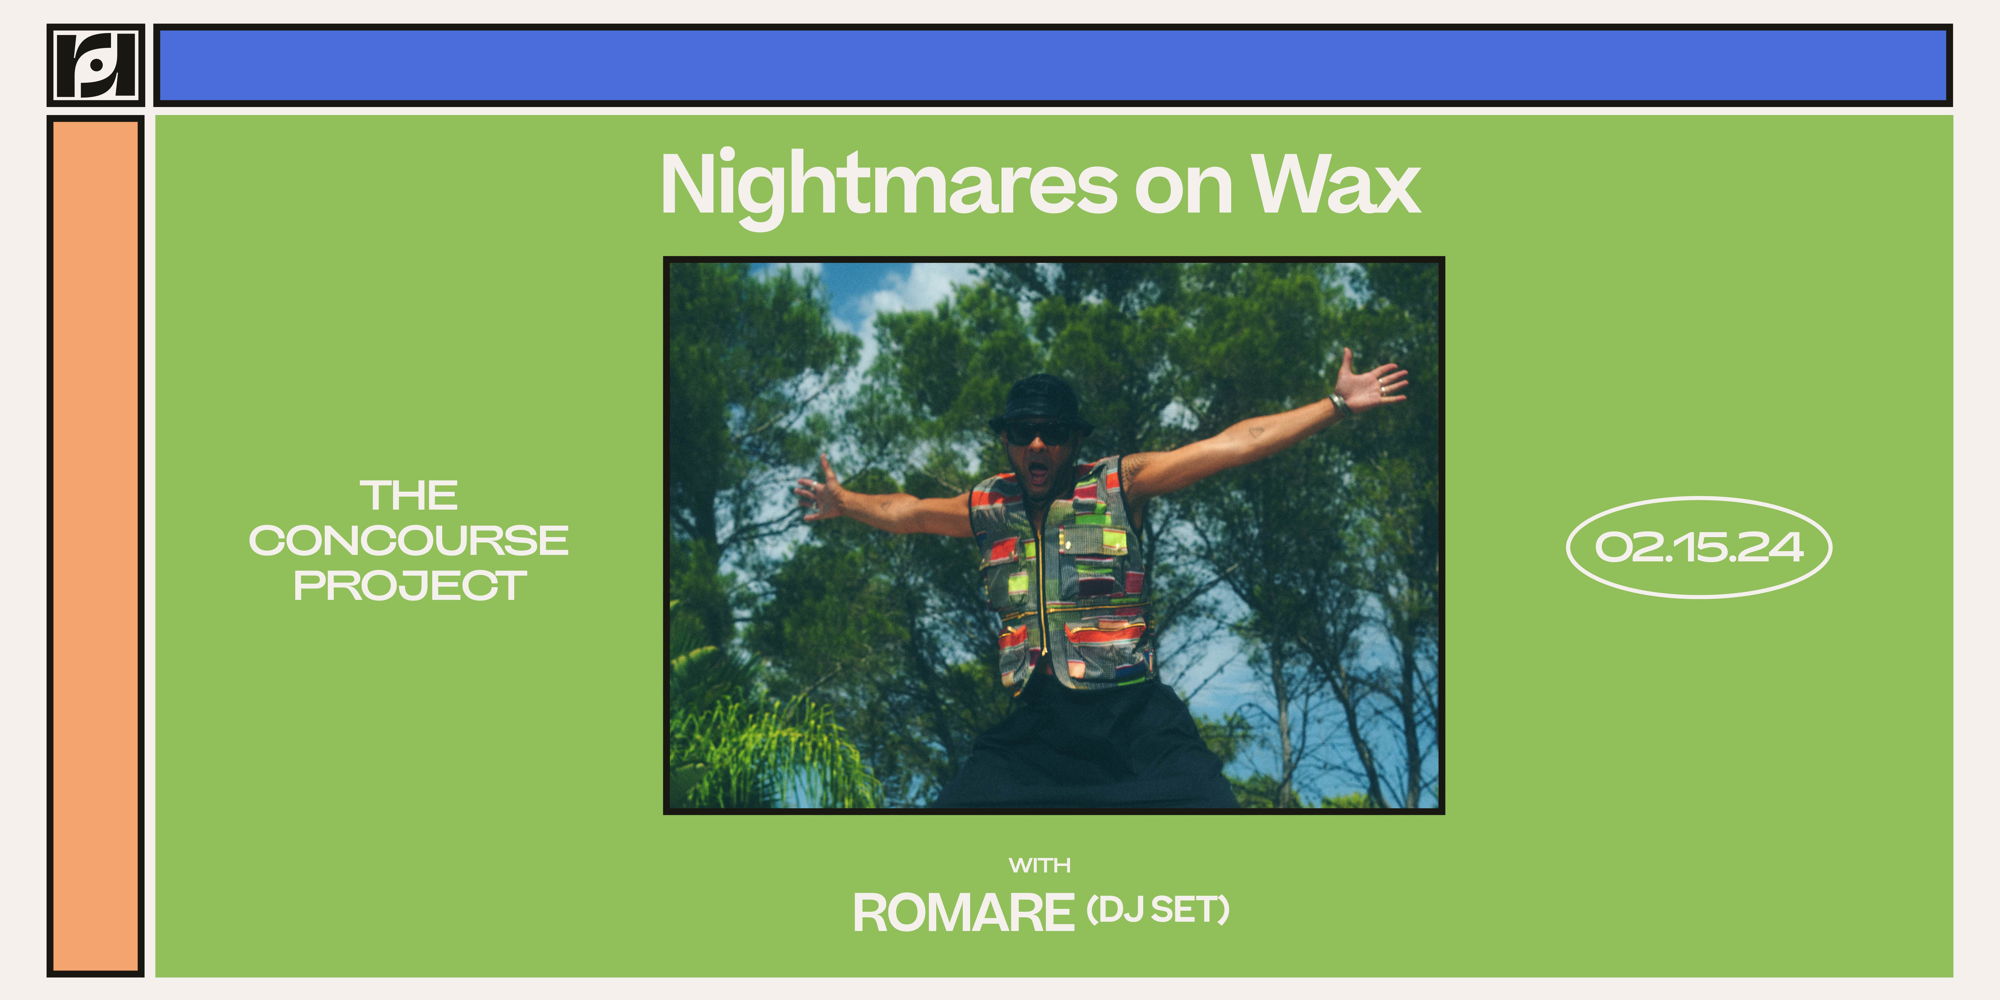 Resound Presents: Nightmares on Wax w/ Romare at The Concourse Project promotional image